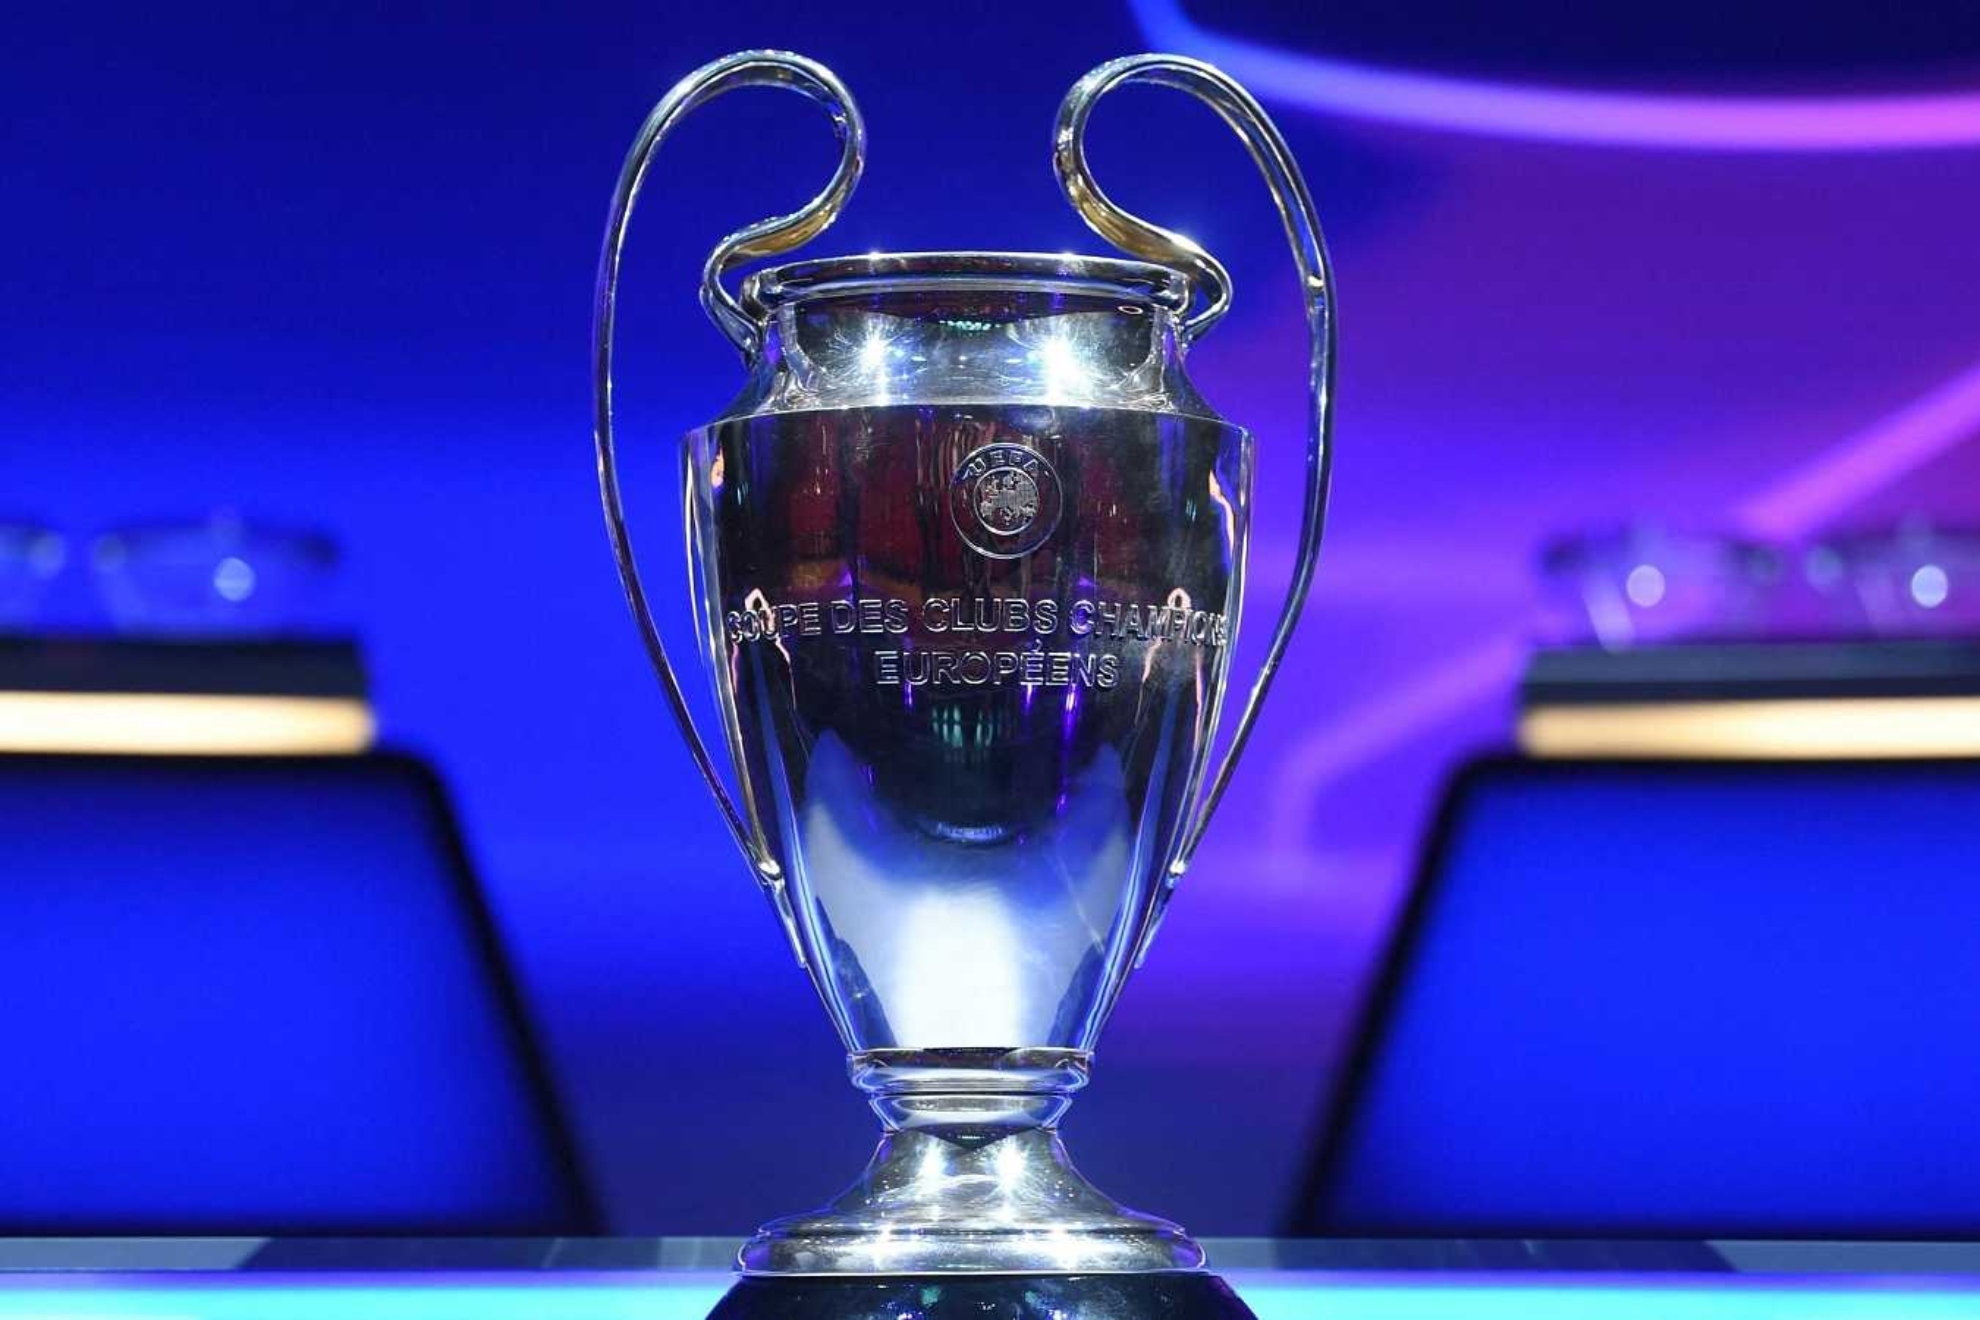 Champions League 2023/24 draw: When it is, where to watch on TV, and qualified teams, format and draws